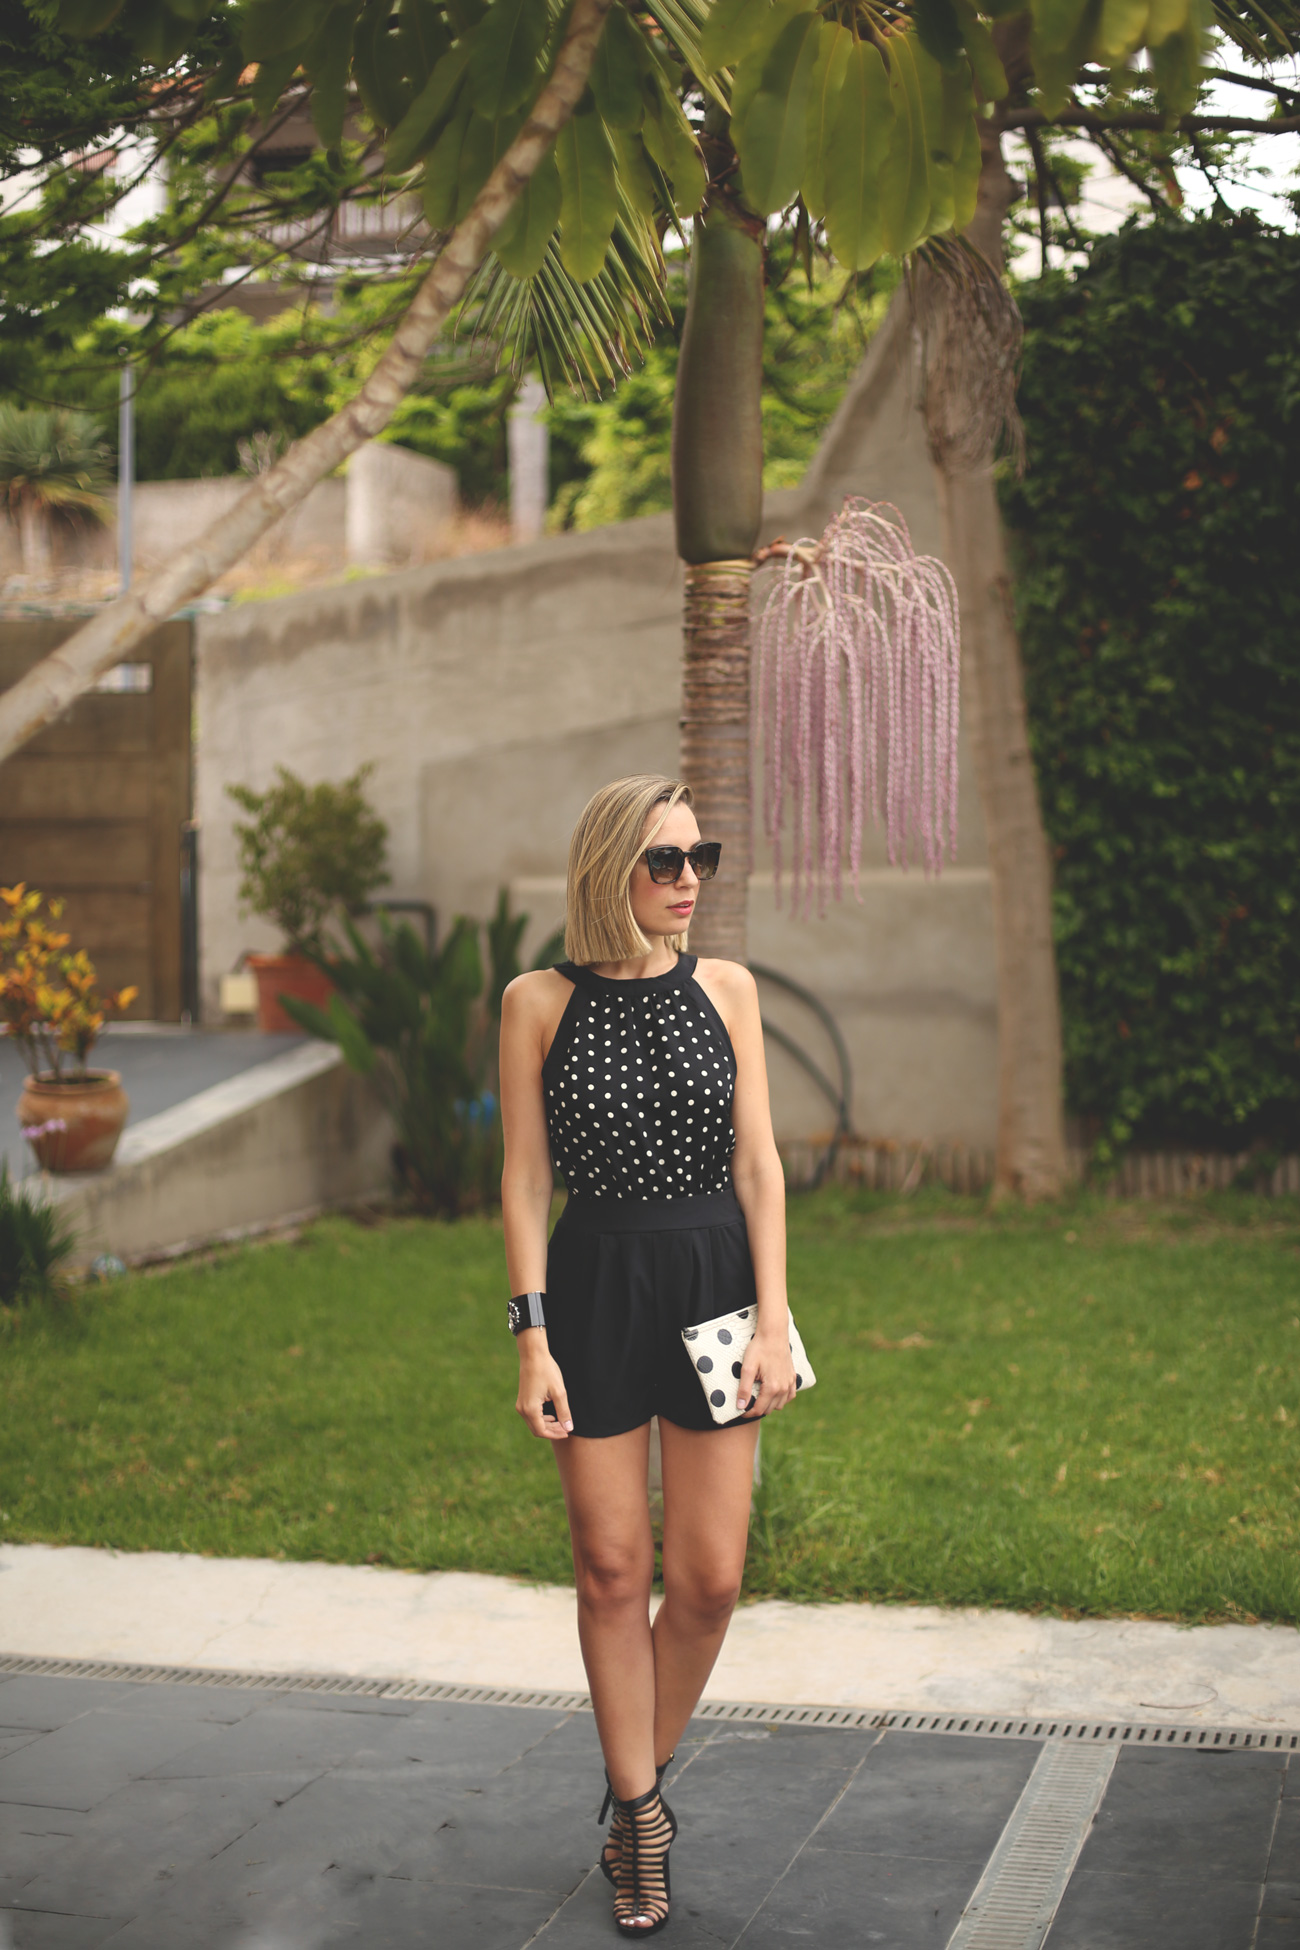 Jumpsuit, Dots print, Marc Jacobs Clutch, Steve Madden, Heels, Black and White, night outfit, summer look, 